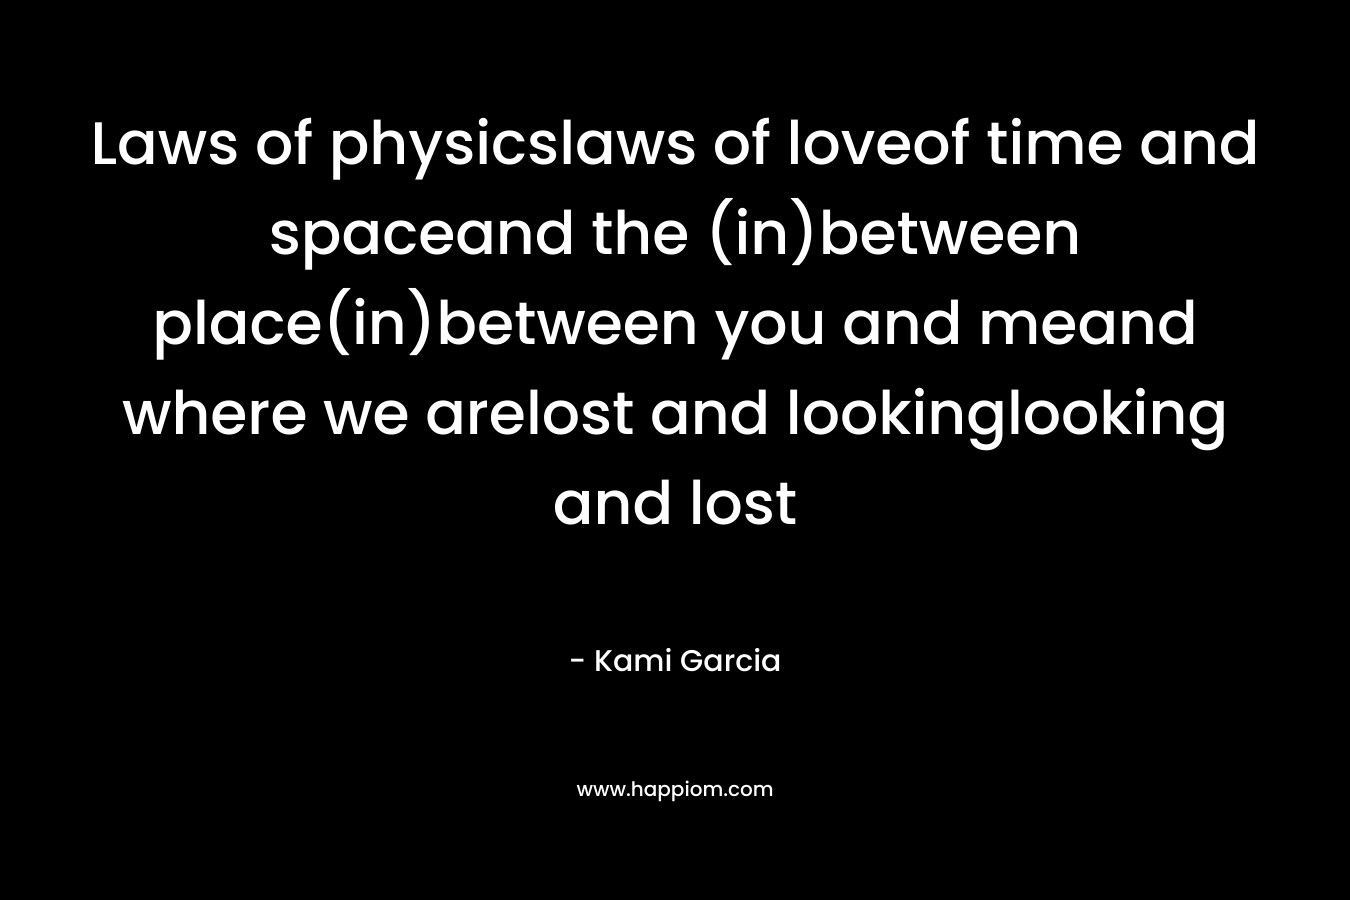 Laws of physicslaws of loveof time and spaceand the (in)between place(in)between you and meand where we arelost and lookinglooking and lost – Kami Garcia